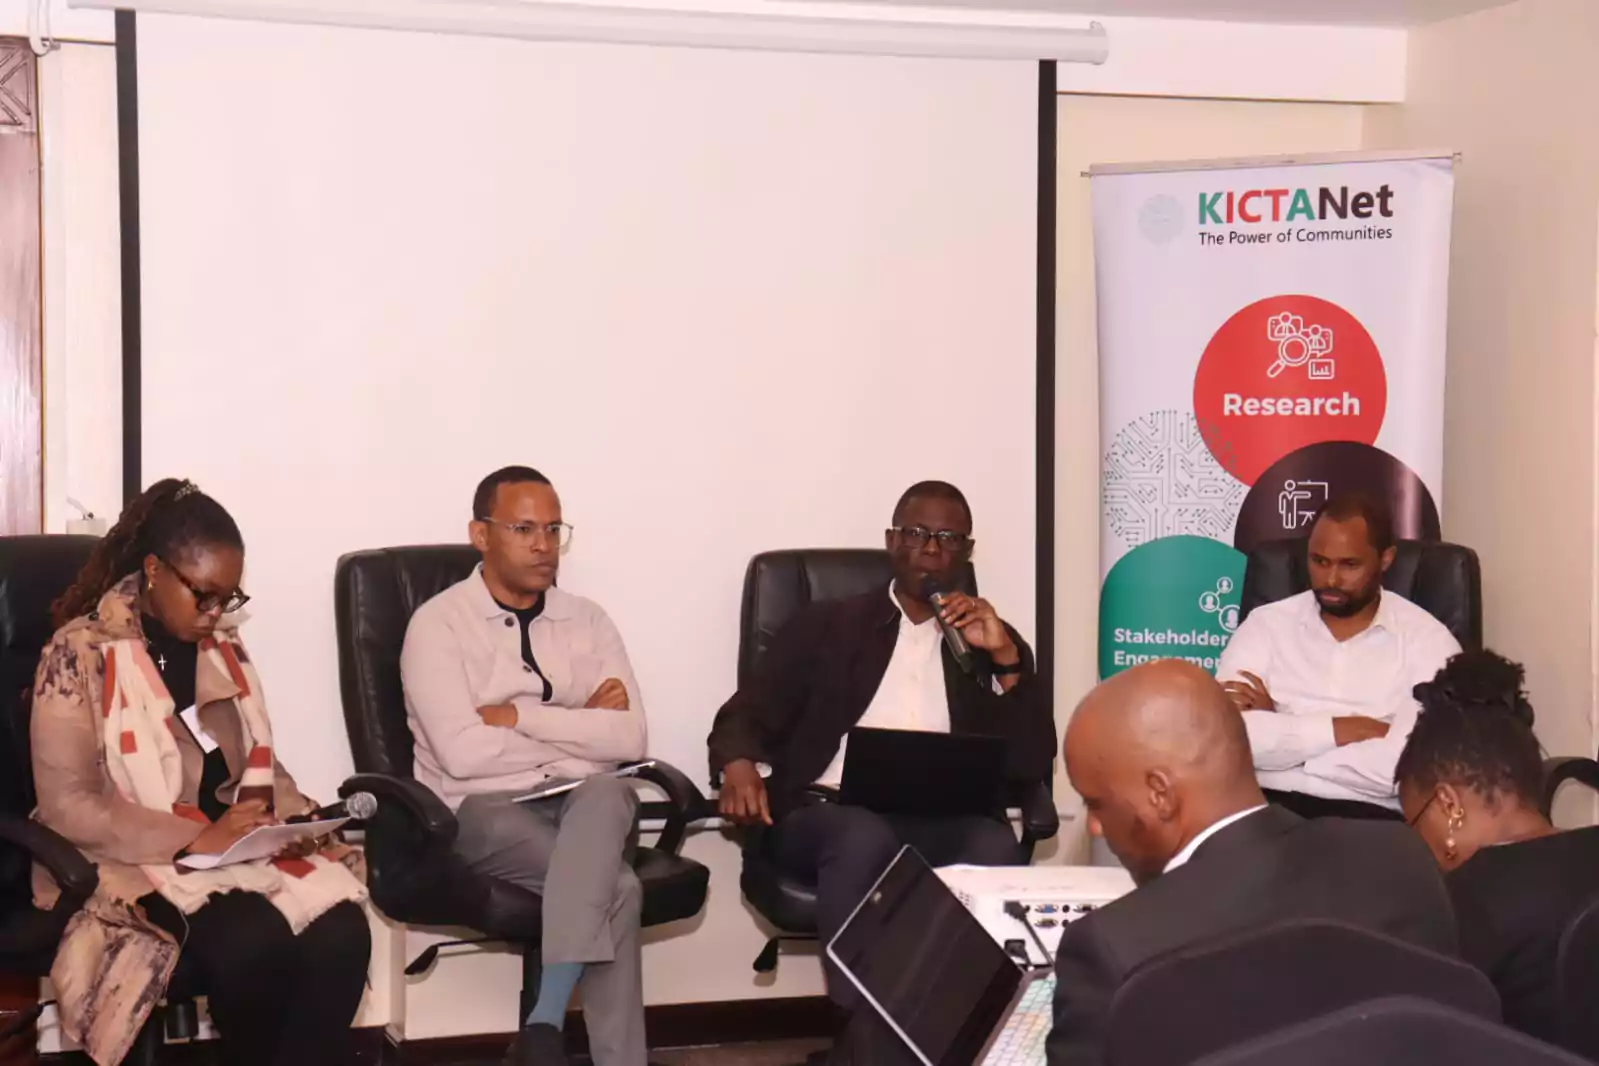 Panel session on “Kenya’s AI Priorities,” moderated by John Walubengo, CISA, CDPSE, (OGW) of the Kenyan ICT Review Task Force, had insights shared by: FLORENCE OGONJO, CIPIT, Kamau Maina, Safaricom PLC, and Jack Ngare, Technical Director Office of the CTO Google.